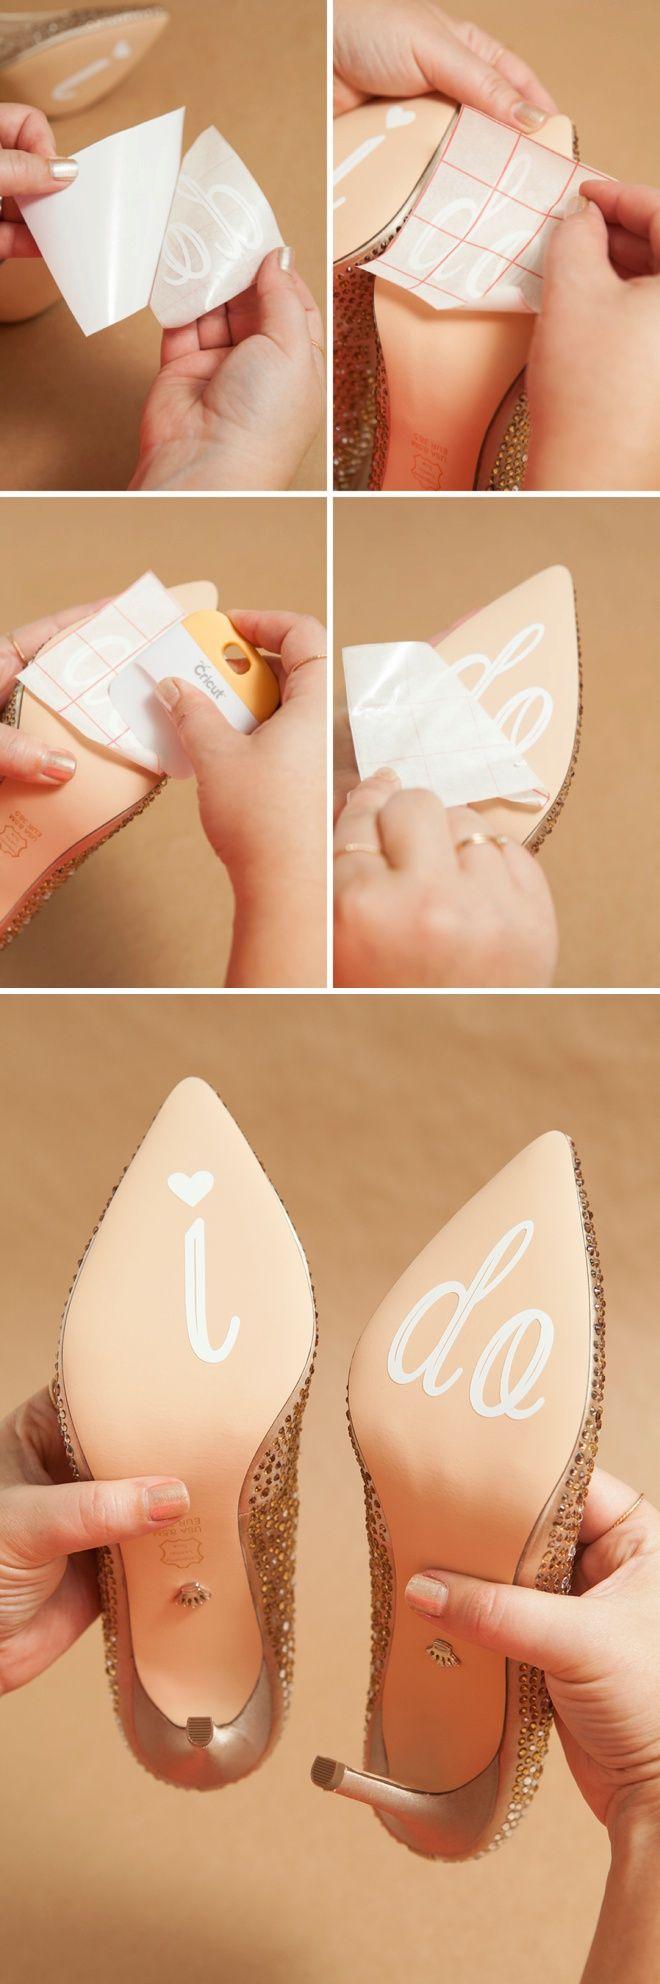 Wedding - Learn How To Make Your Own Custom, Wedding Shoe Stickers!